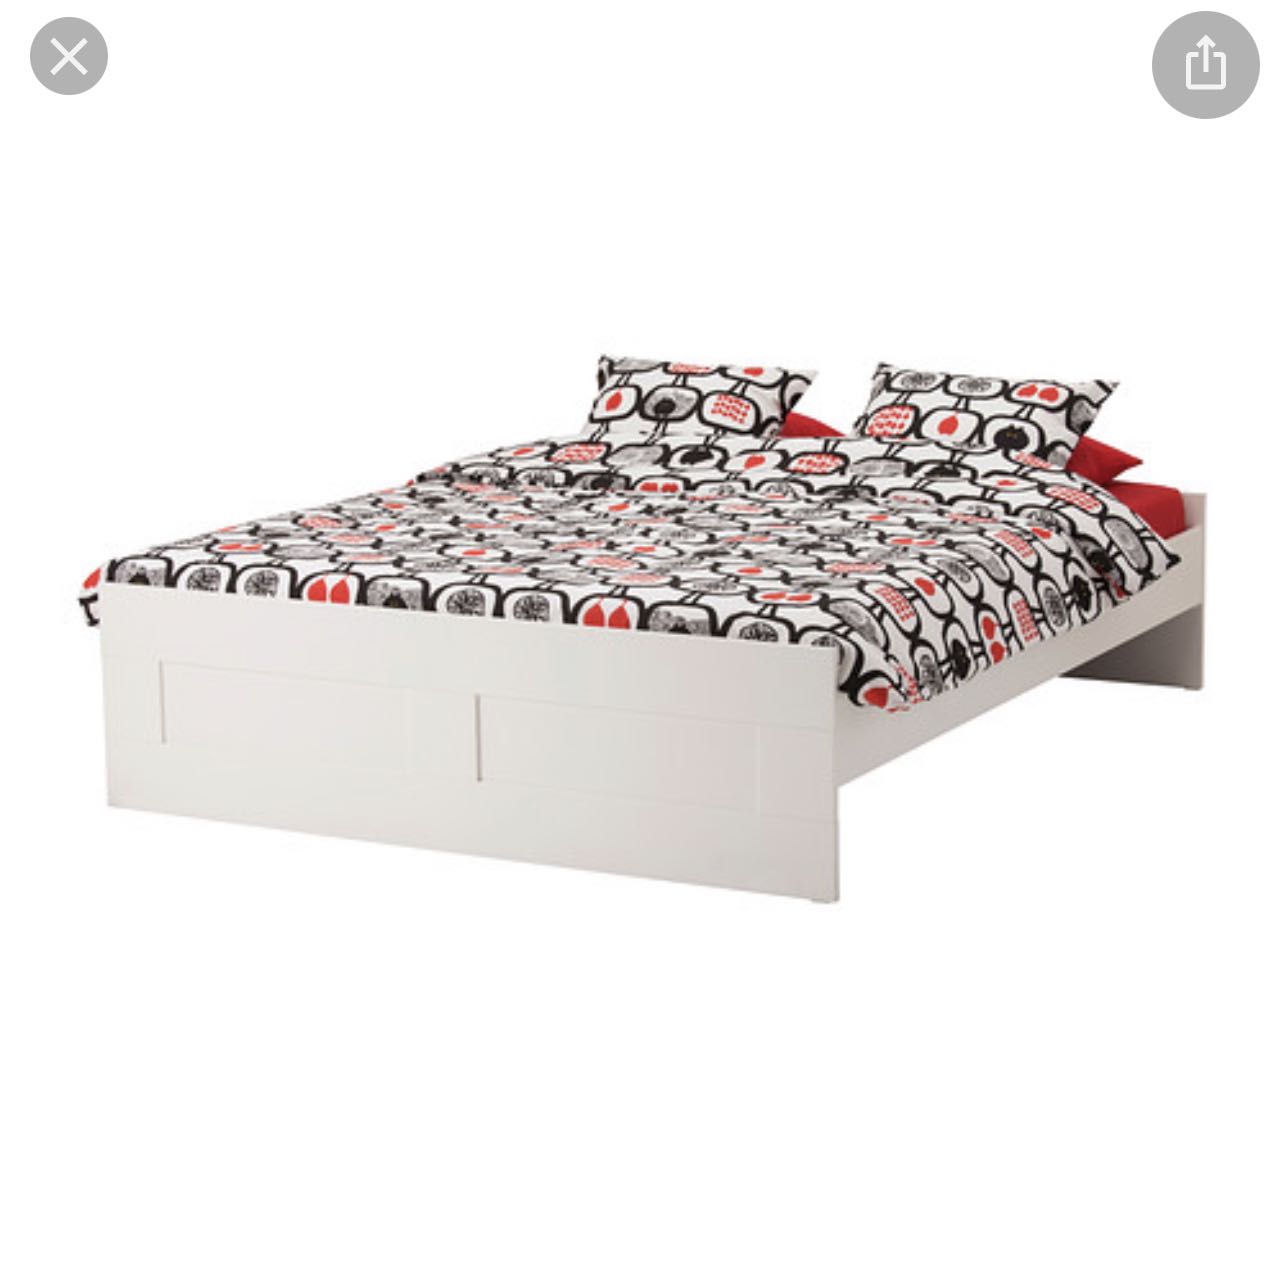 Ikea Brimnes Bed Frame Without Storage, Ikea Full Bed Frame With Storage